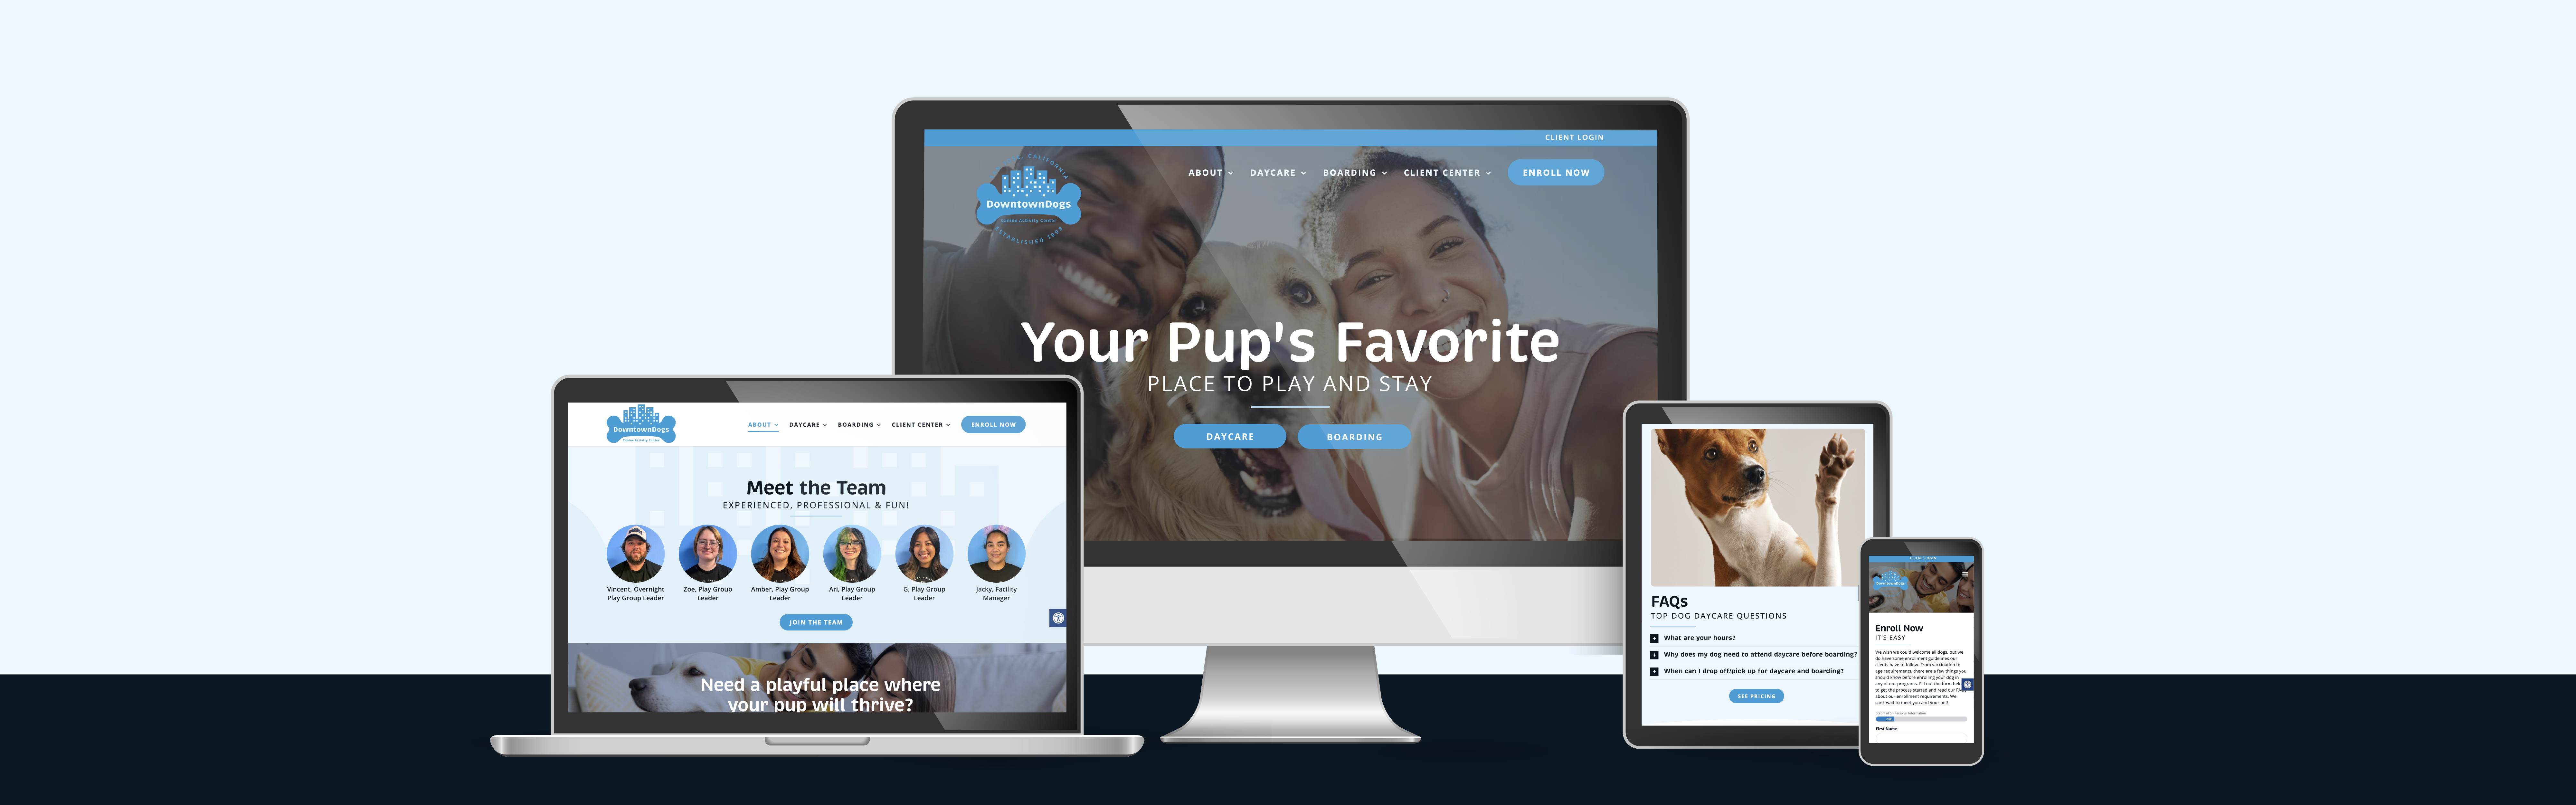 Downtown Dogs website design